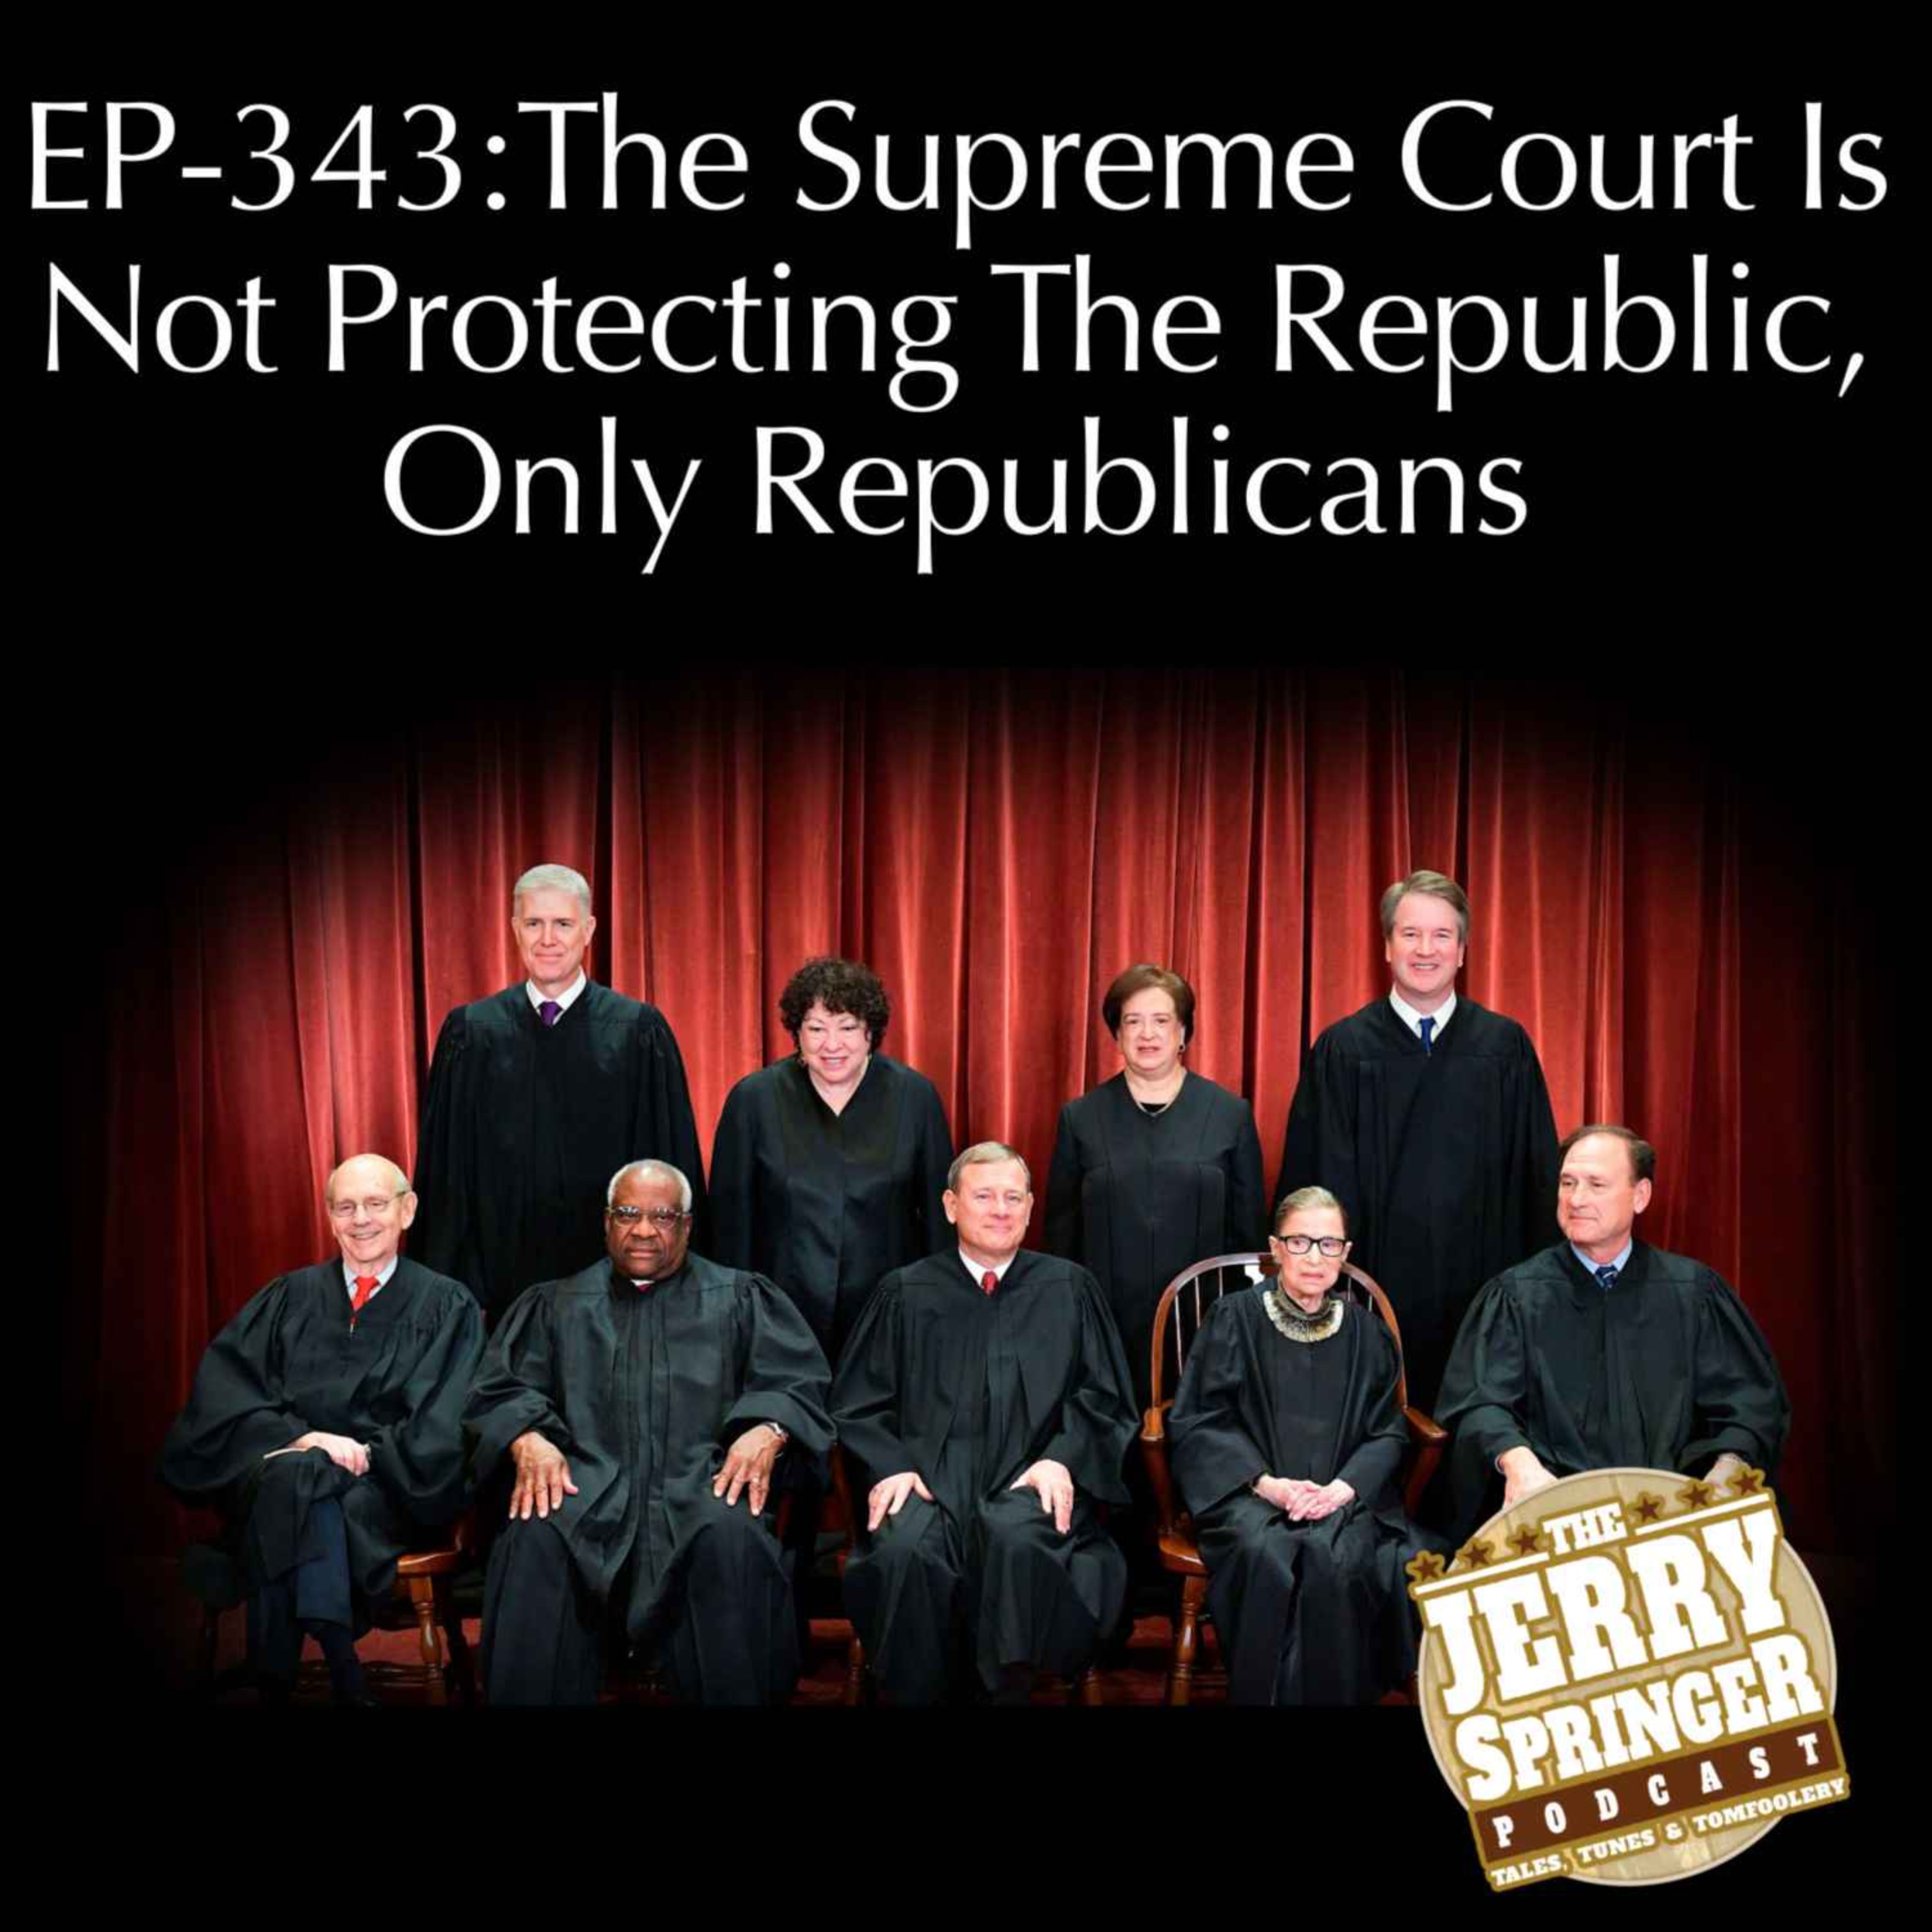 The Supreme Court Is Not Protecting The Republic, Only Republicans: EP - 343